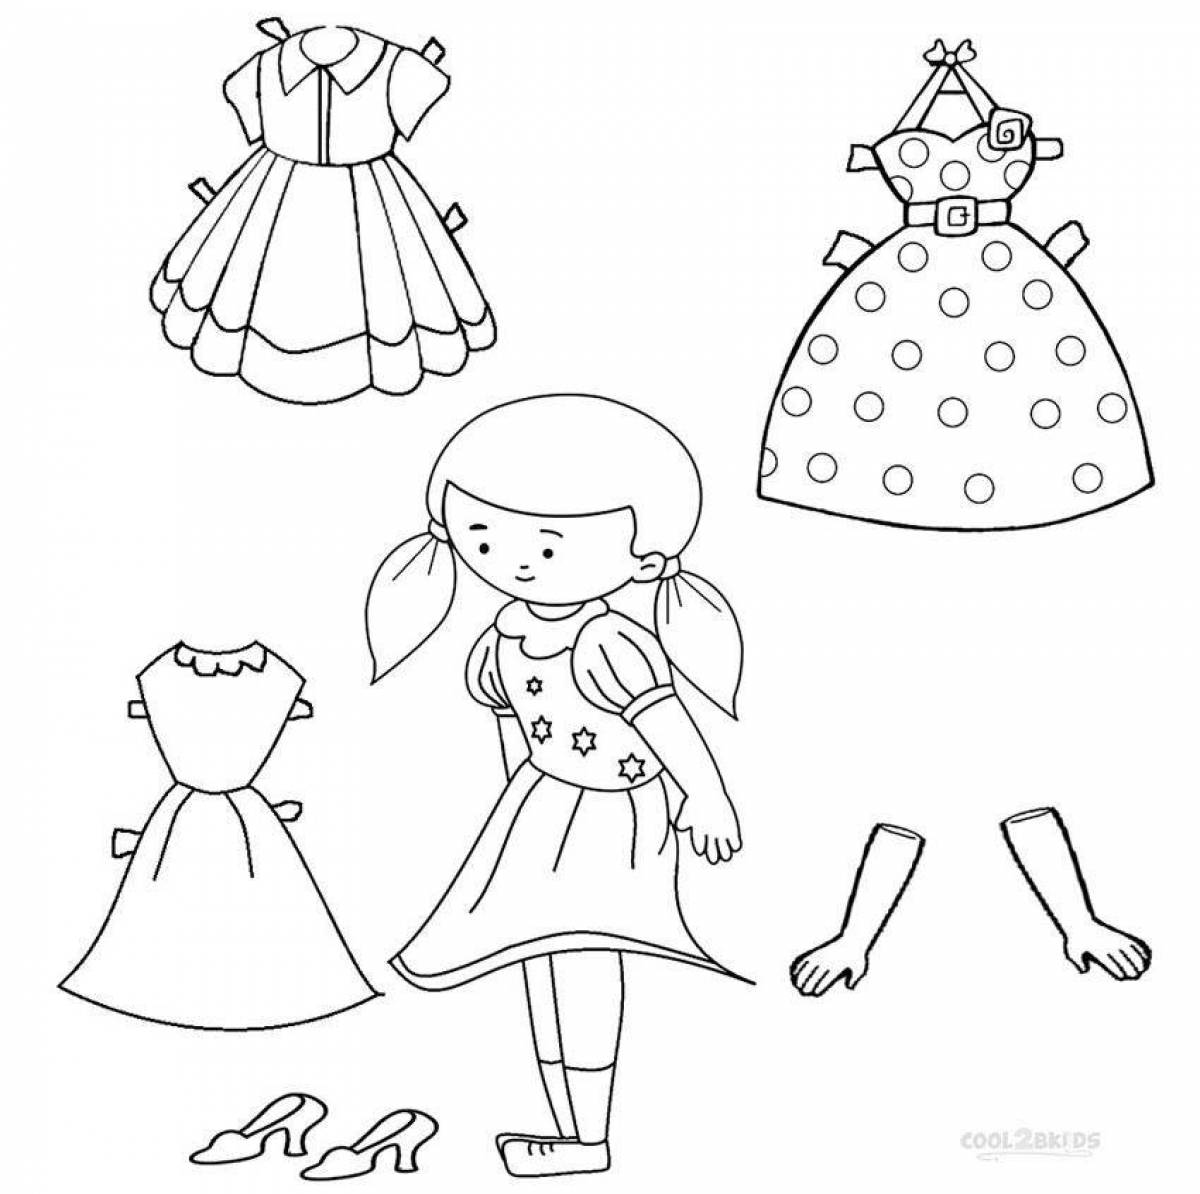 Adorable coloring dress for doll